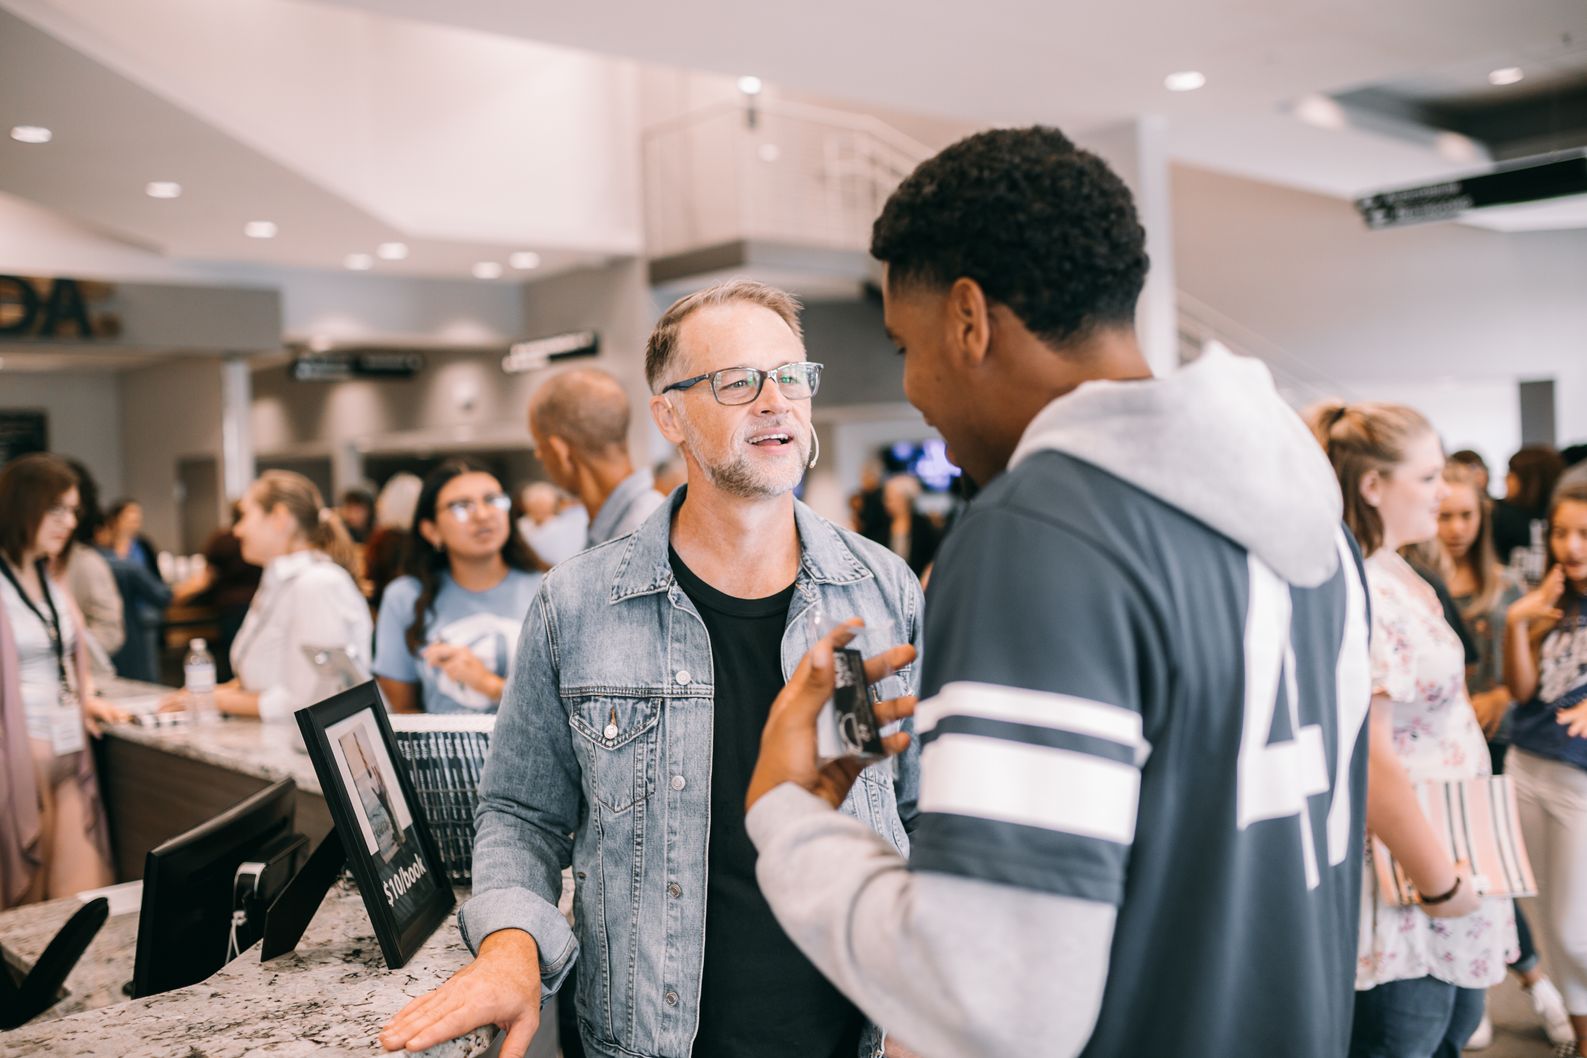 Connecting to different people at KingdomLife Church in Frisco, Texas.